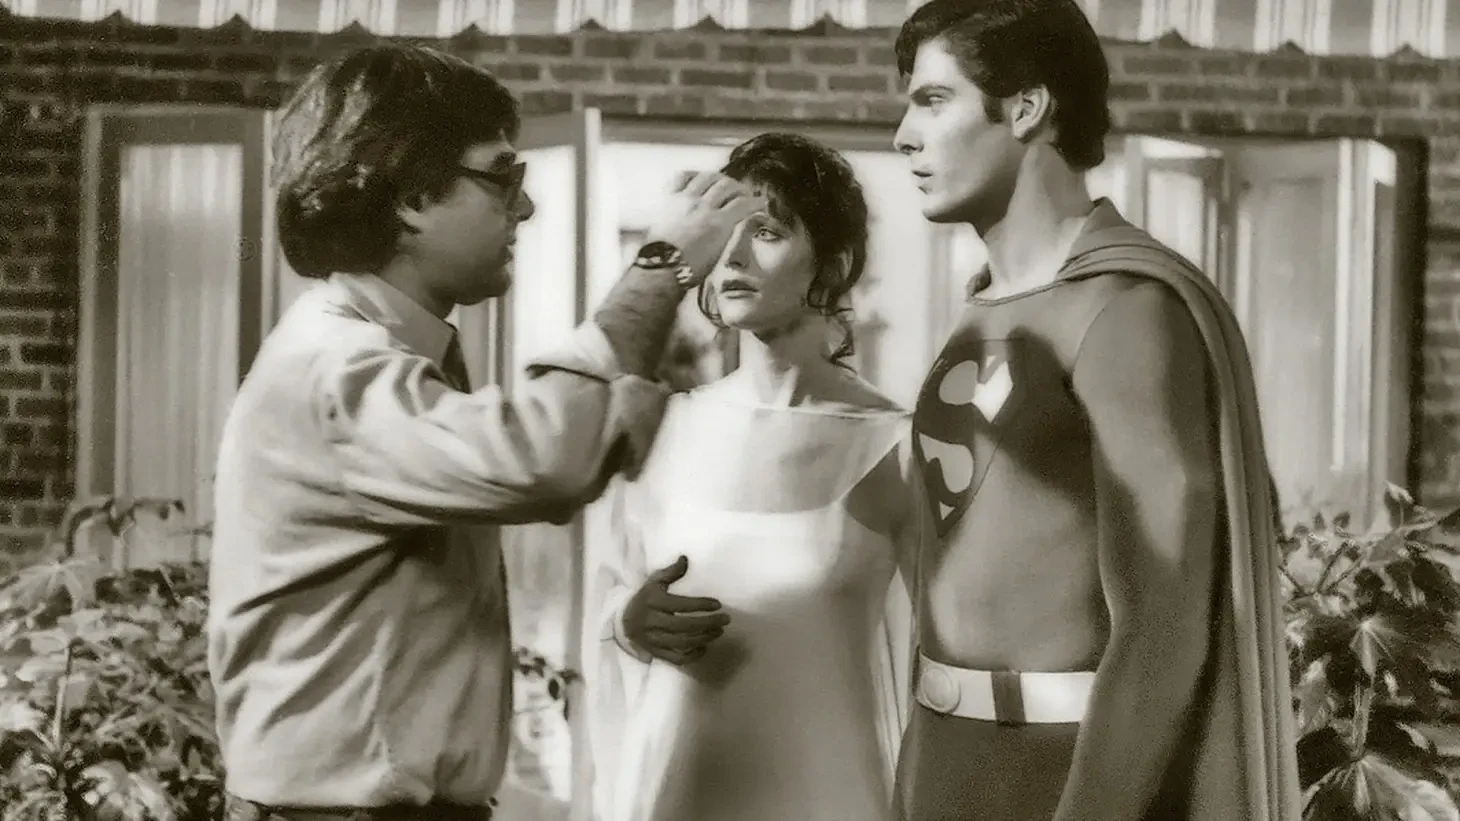 Superman actor Christopher Reeve with Richard Donner (director)